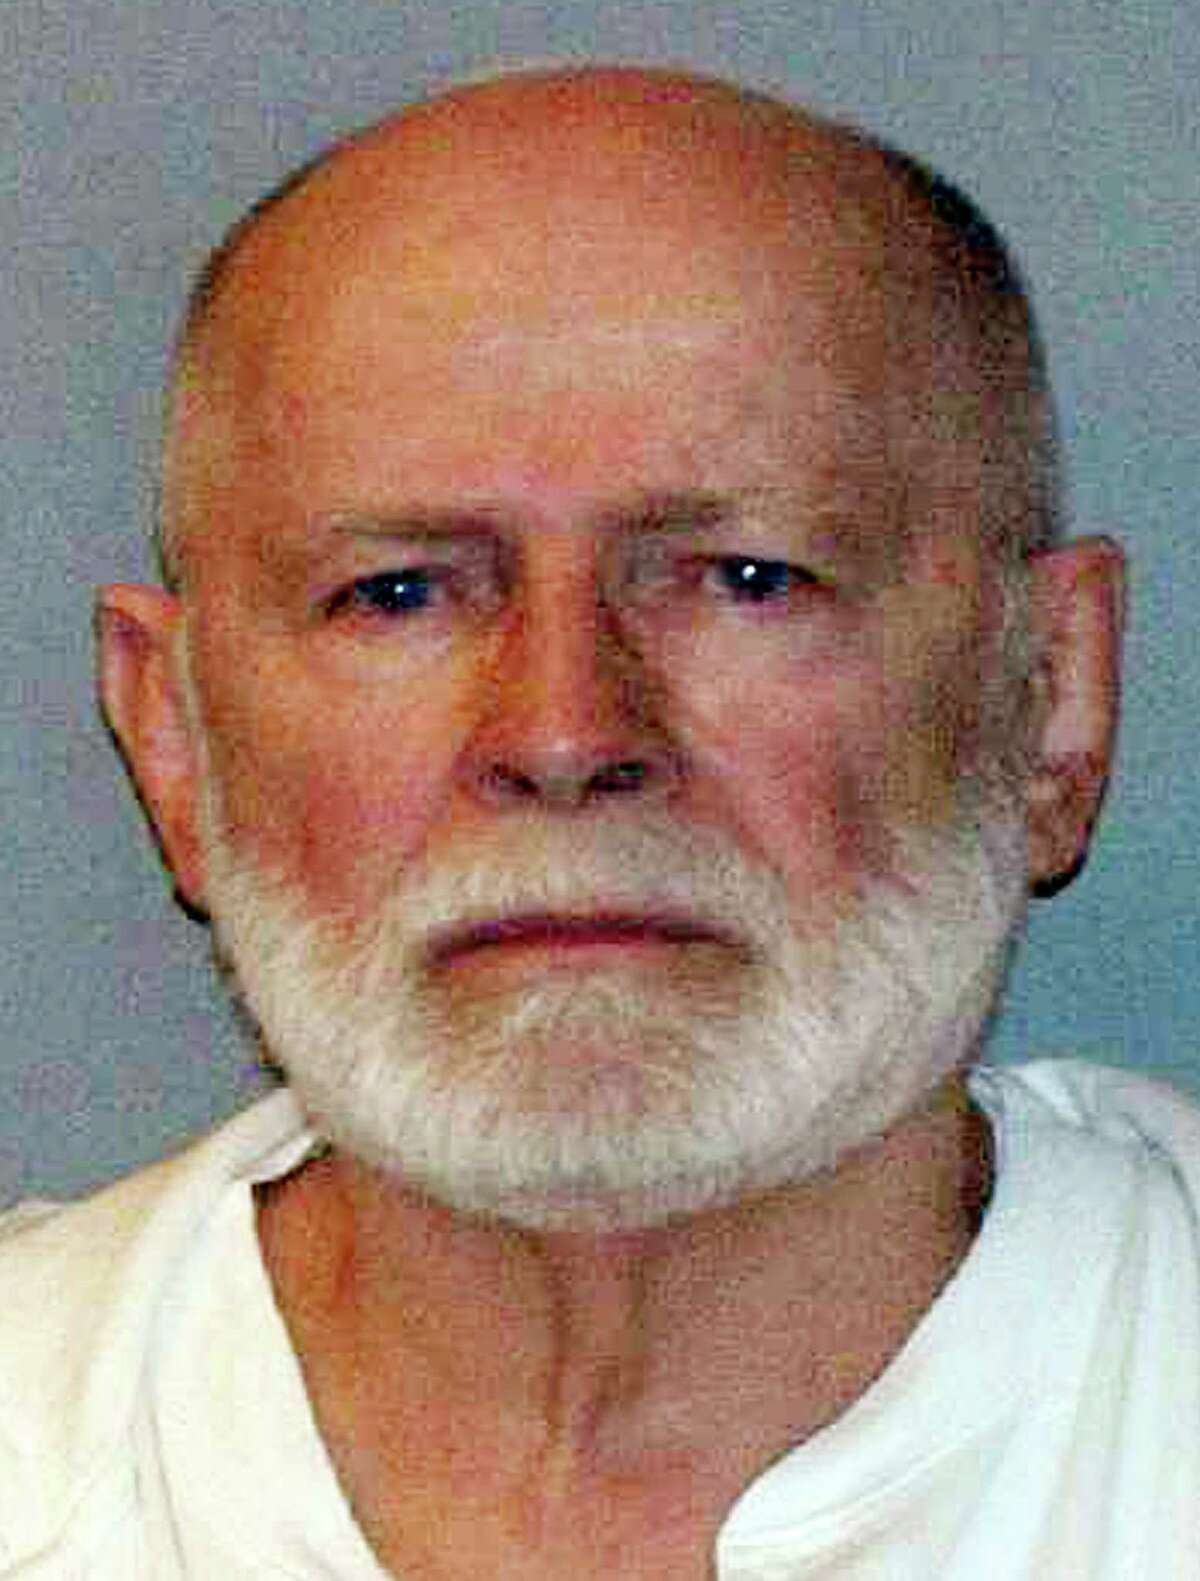 FILE - This June 23, 2011 booking photo provided by the U.S. Marshals Service shows James "Whitey" Bulger, captured in Santa Monica, Calif., after 16 years on the run. Bulger's trial began Wednesday, June 12, 2013 in federal court in Boston, where he is charged with playing a role in 19 killings during the '70s and '80s while allegedly the boss of the Winter Hill Gang. (AP Photo/ U.S. Marshals Service, File)